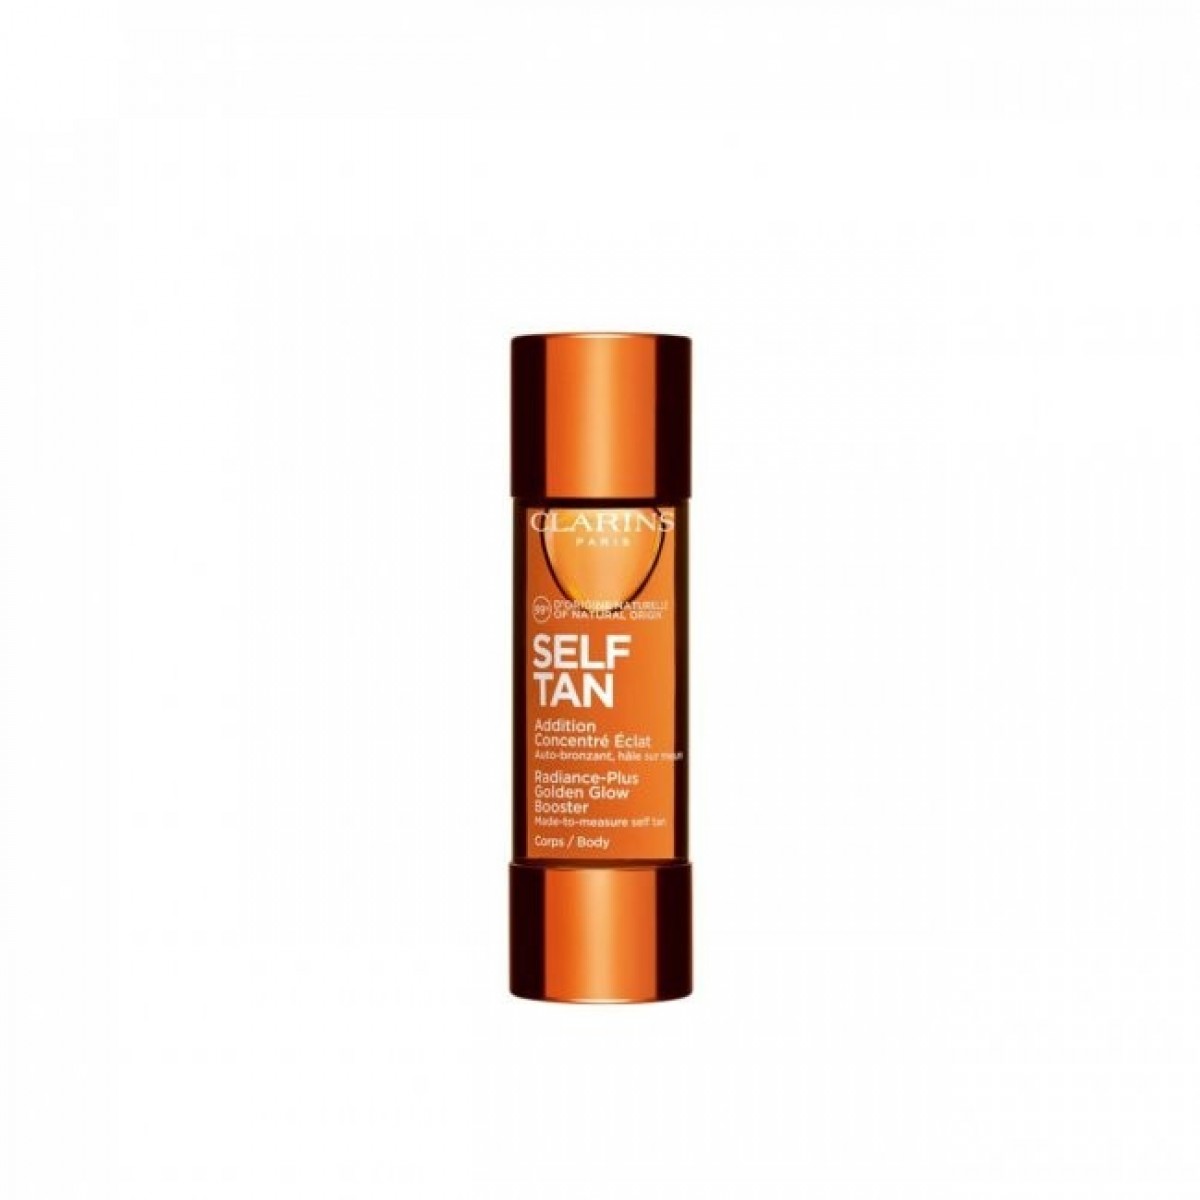 Radiance-Plus Golden Glow Body Booster